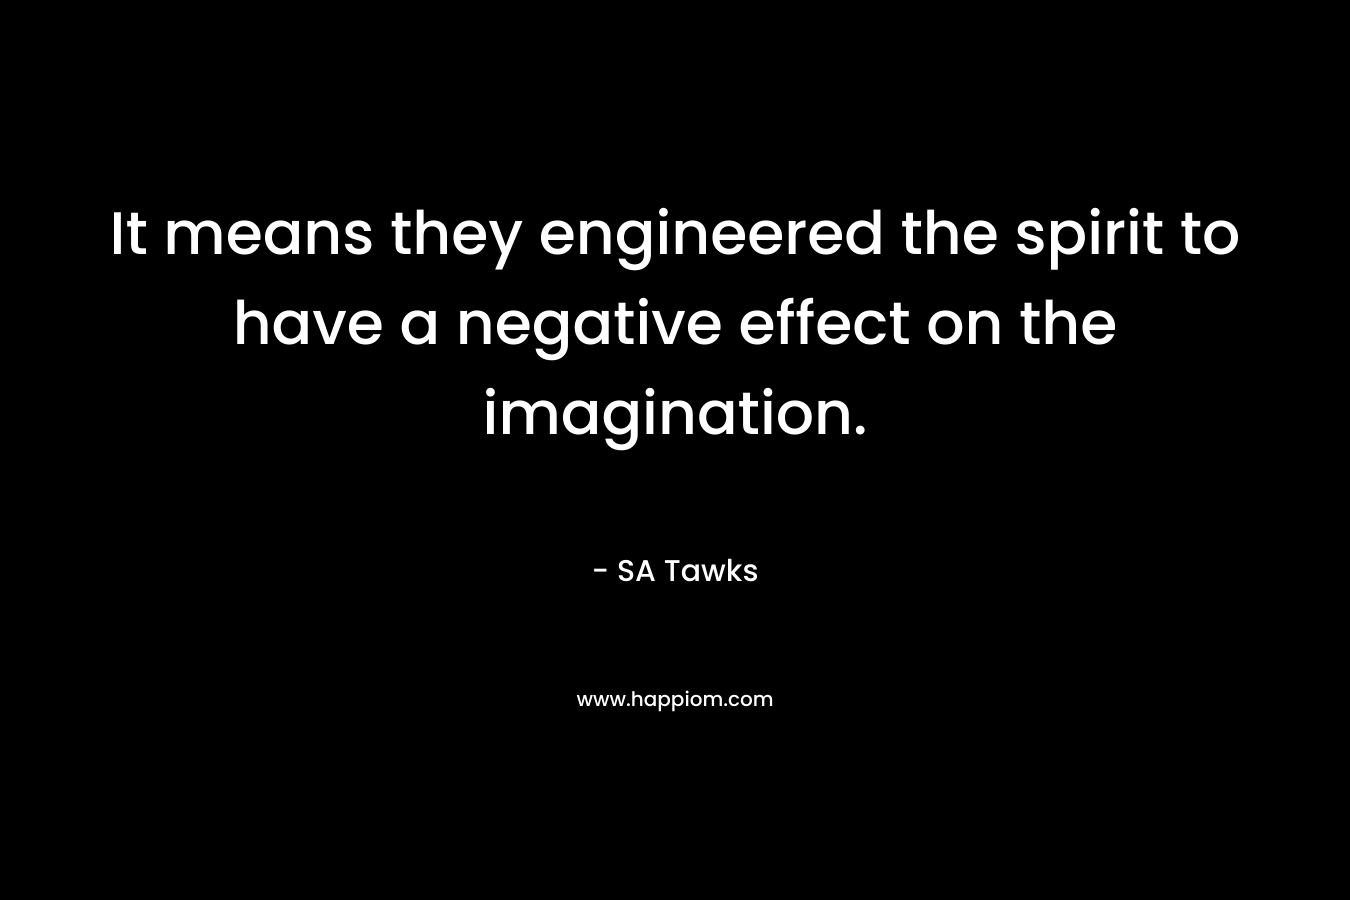 It means they engineered the spirit to have a negative effect on the imagination.